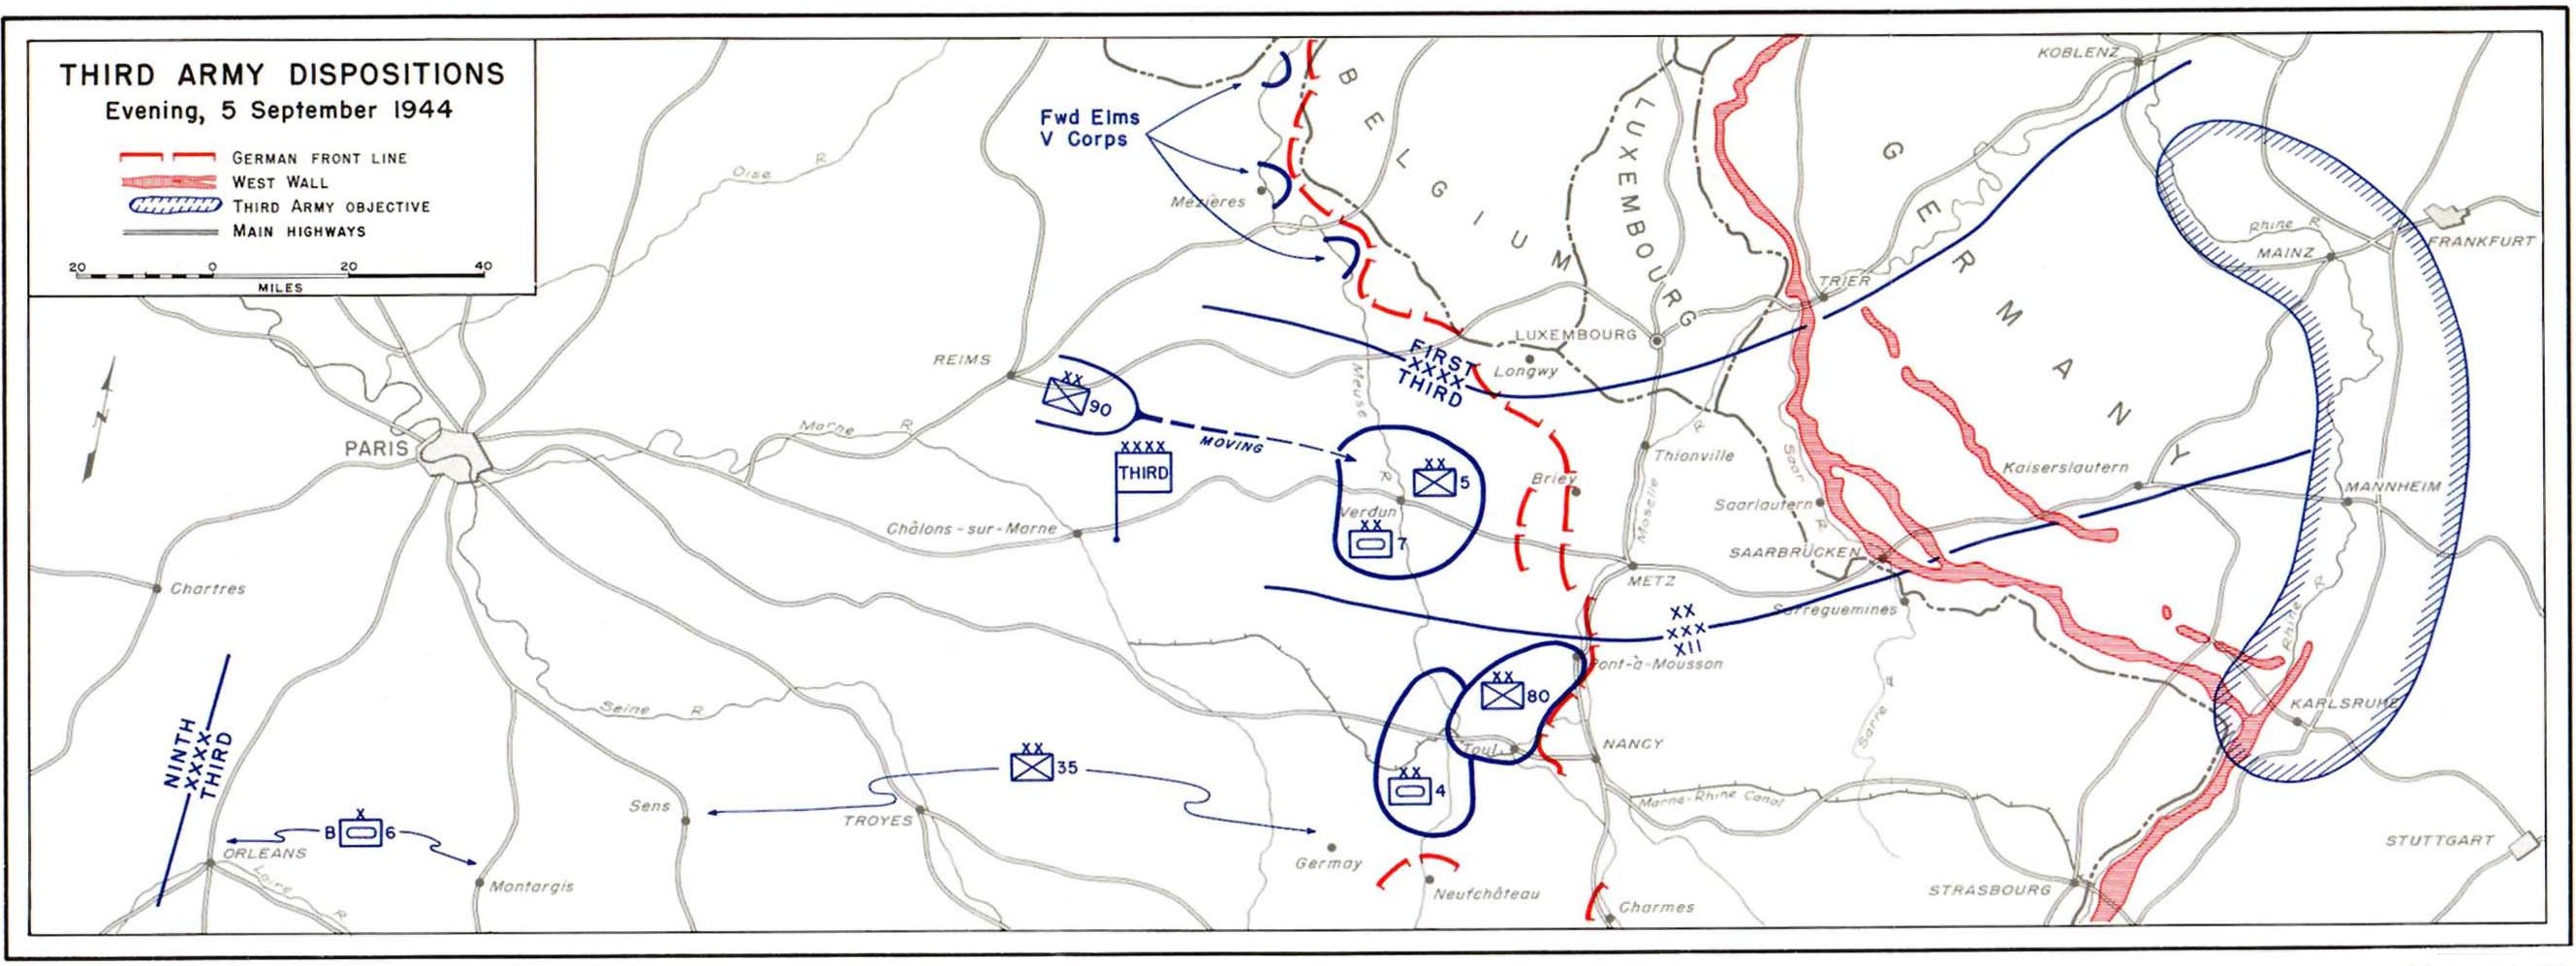 Map depicting the dispositions of the US 3rd Army at the evening of 5 Sep 1944